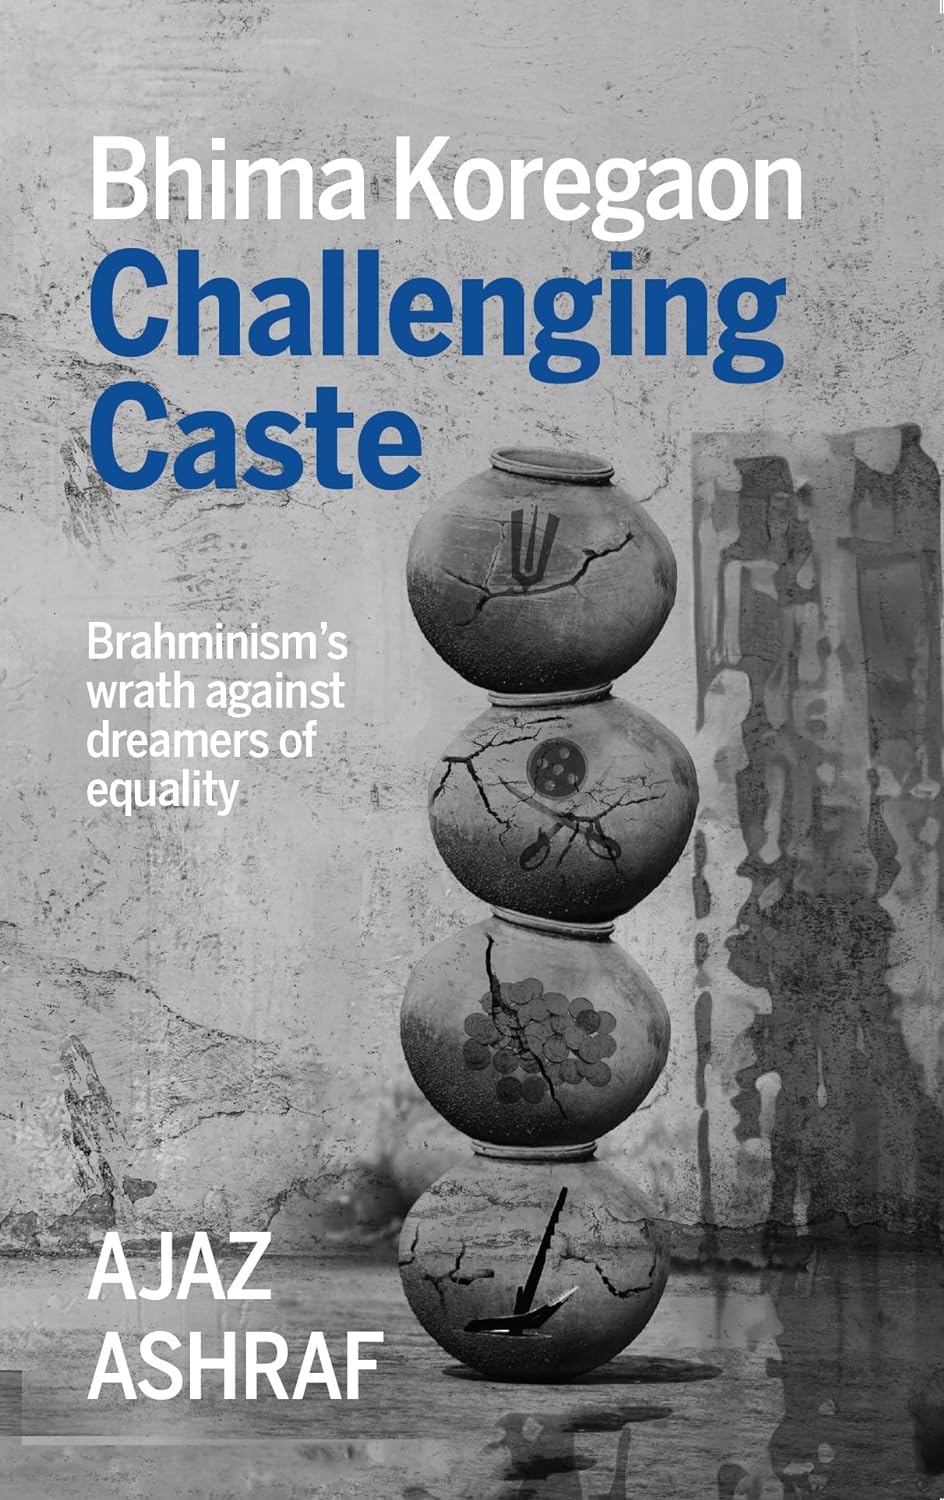 Brahminism's wrath against dreamers of equality